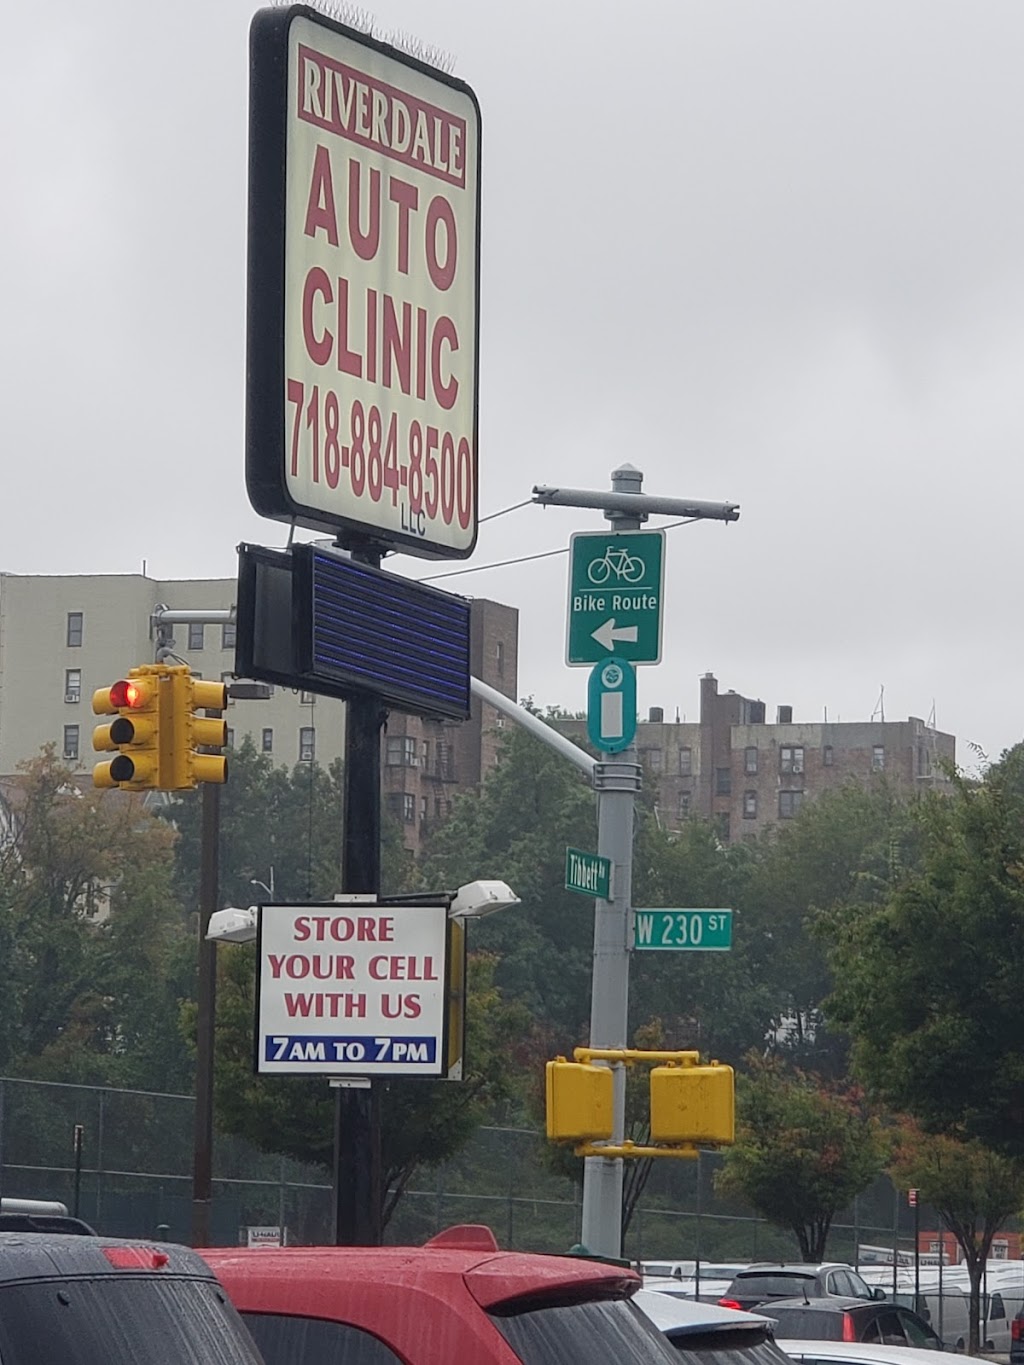 Riverdale Auto Clinic | 303 W 230th St, The Bronx, NY 10463 | Phone: (347) 947-9280